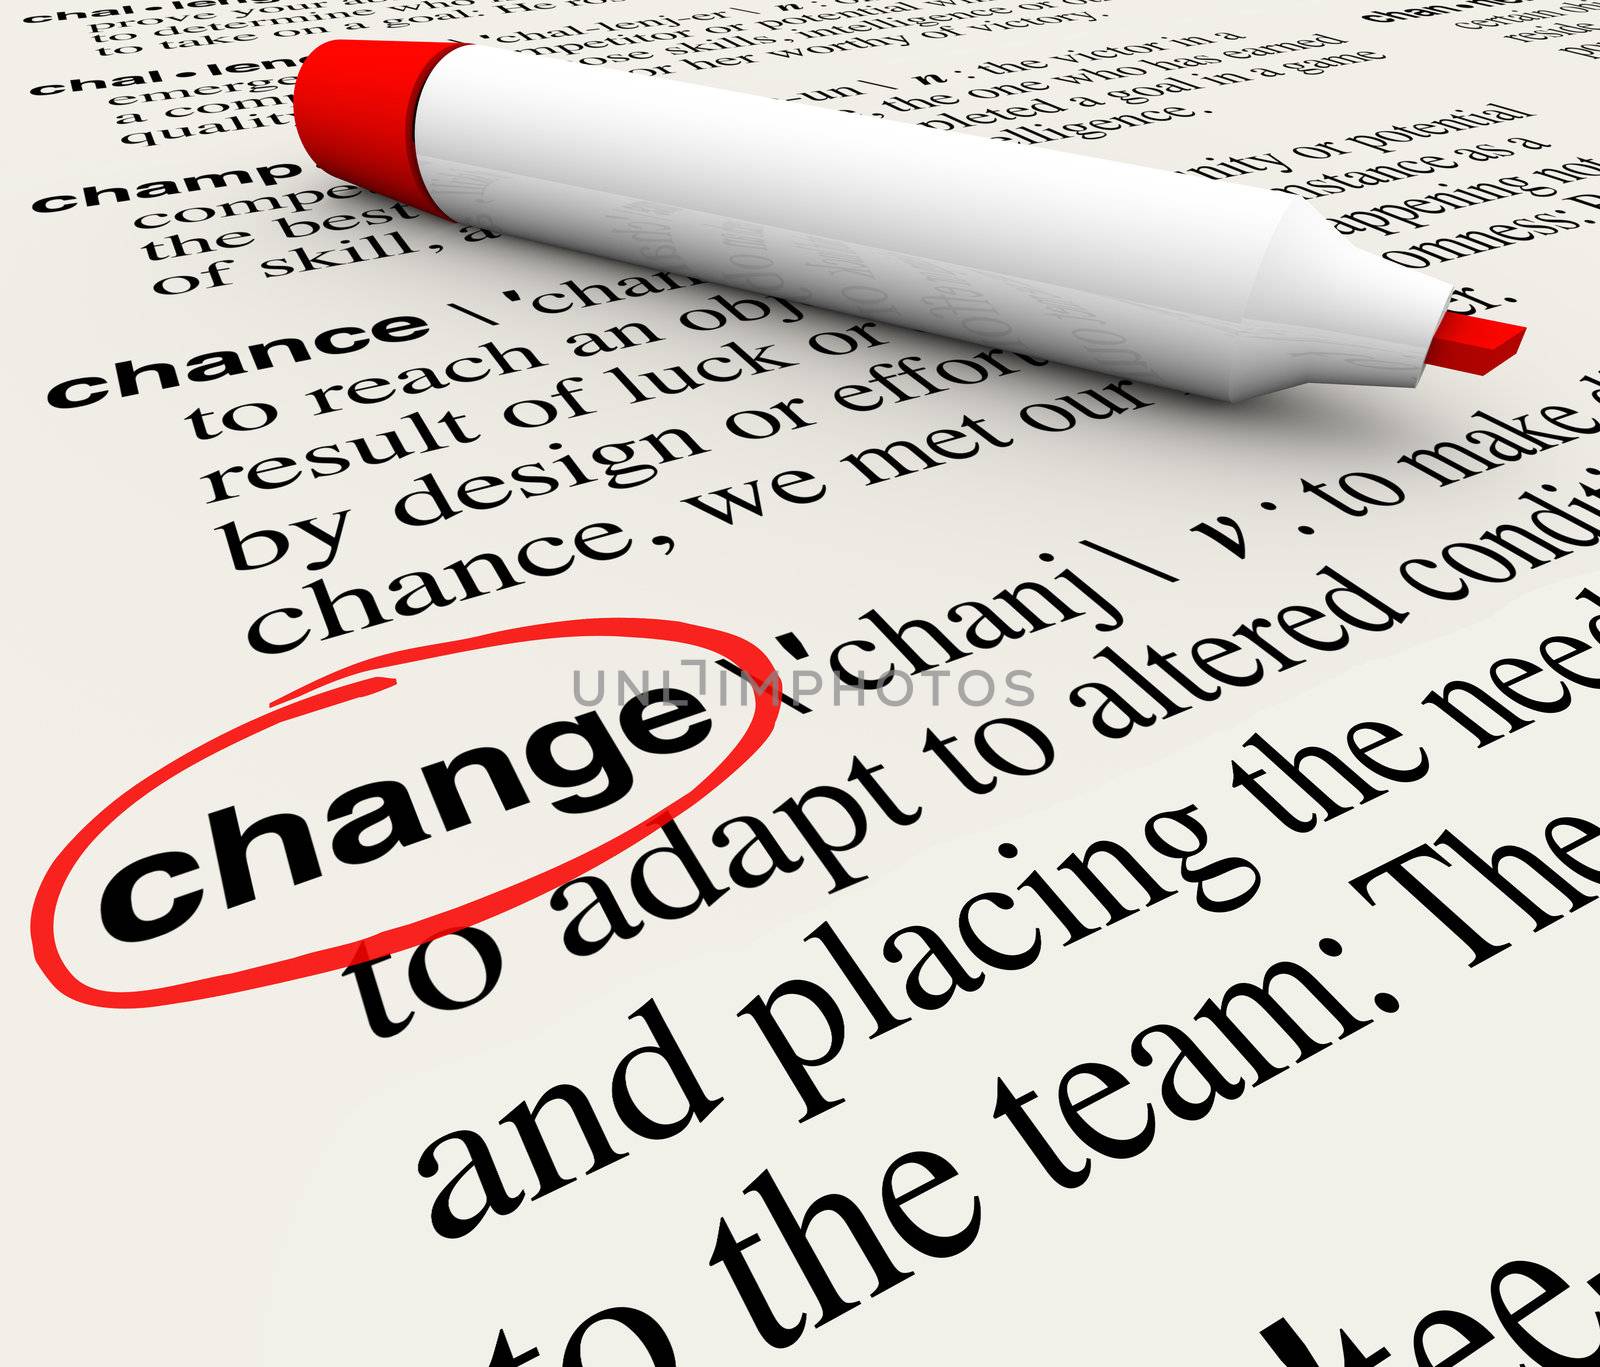 A dictionary page with the word change circled to define the term as adapting and evolving to conditions that require shifting your perspective or actions to survive and thrive